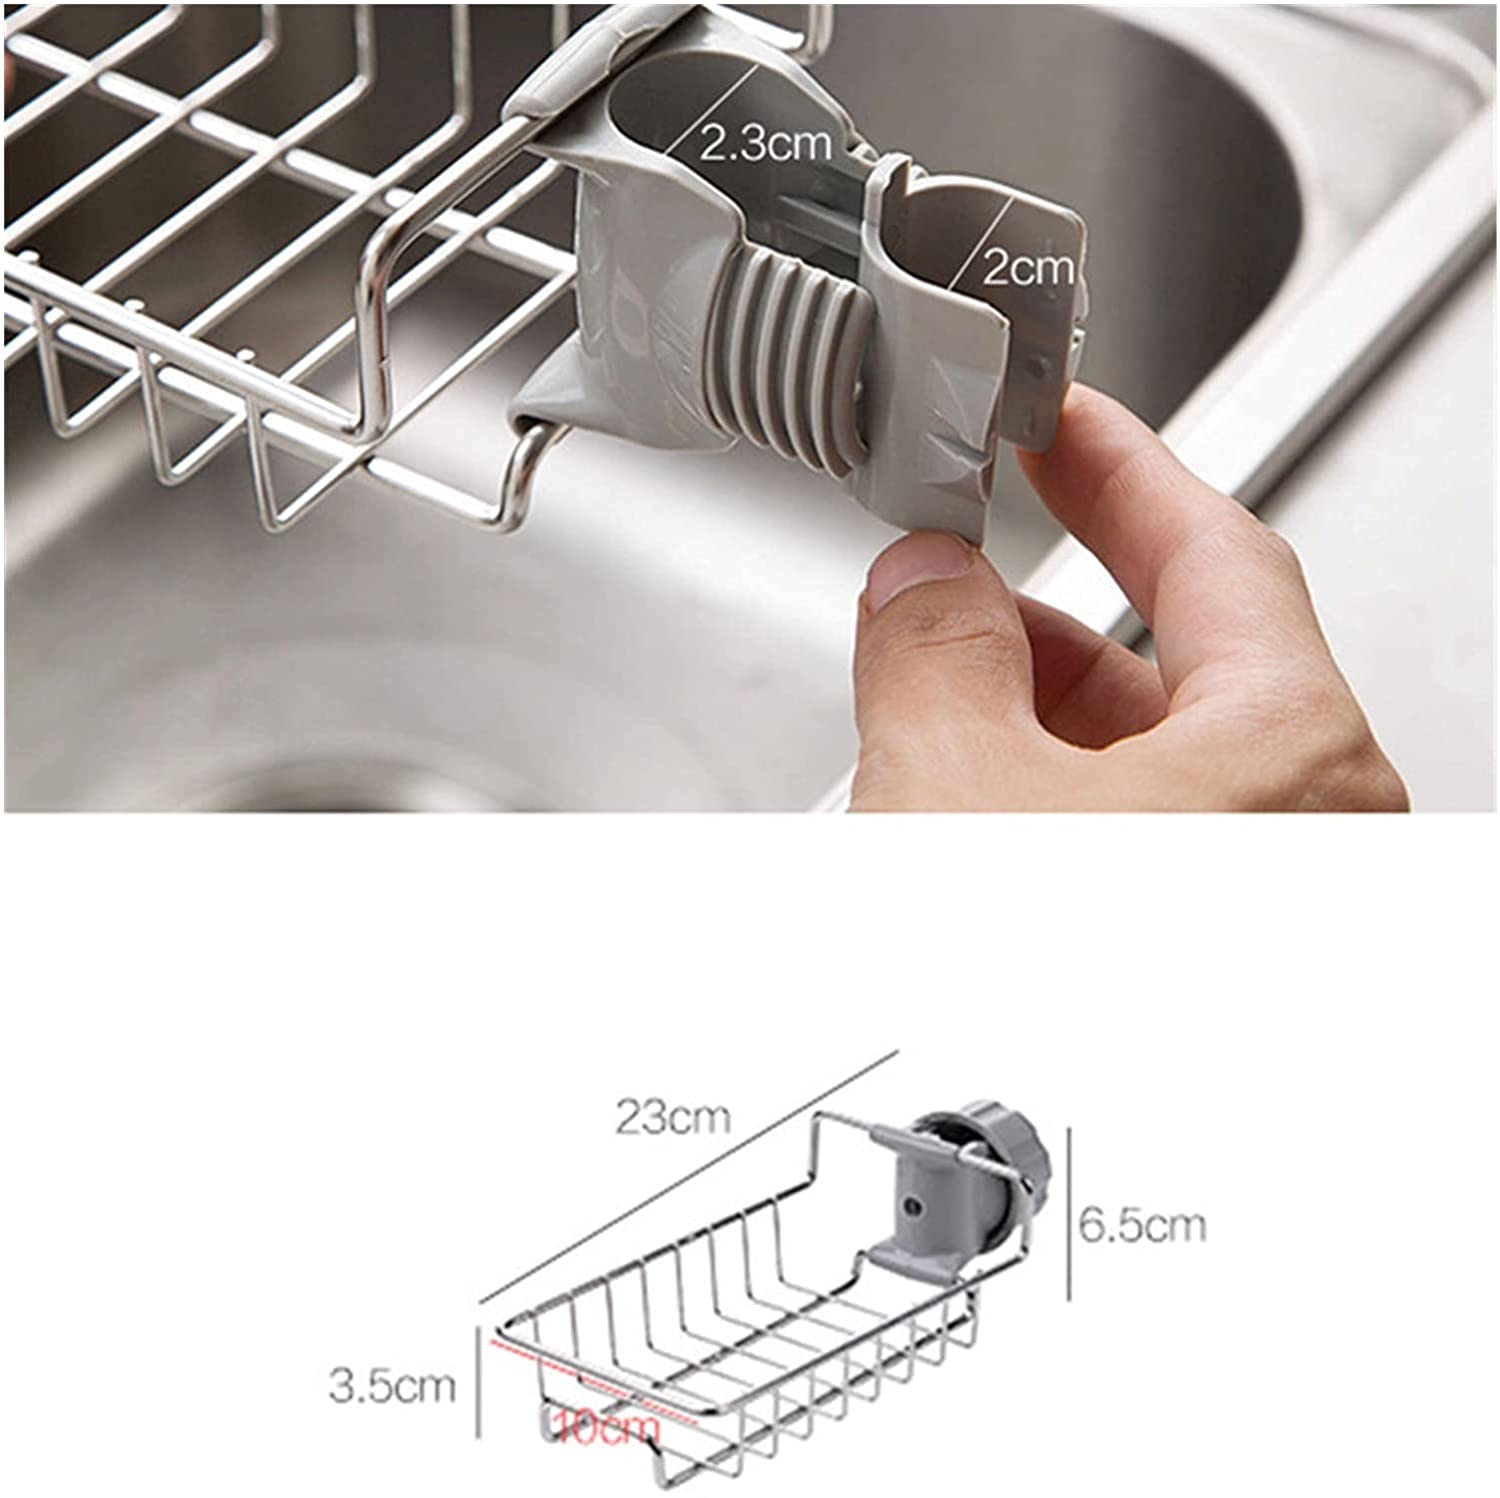 Sponge Holder Sink Organizer Drainer Faucet Hanging Storage Rack with its size